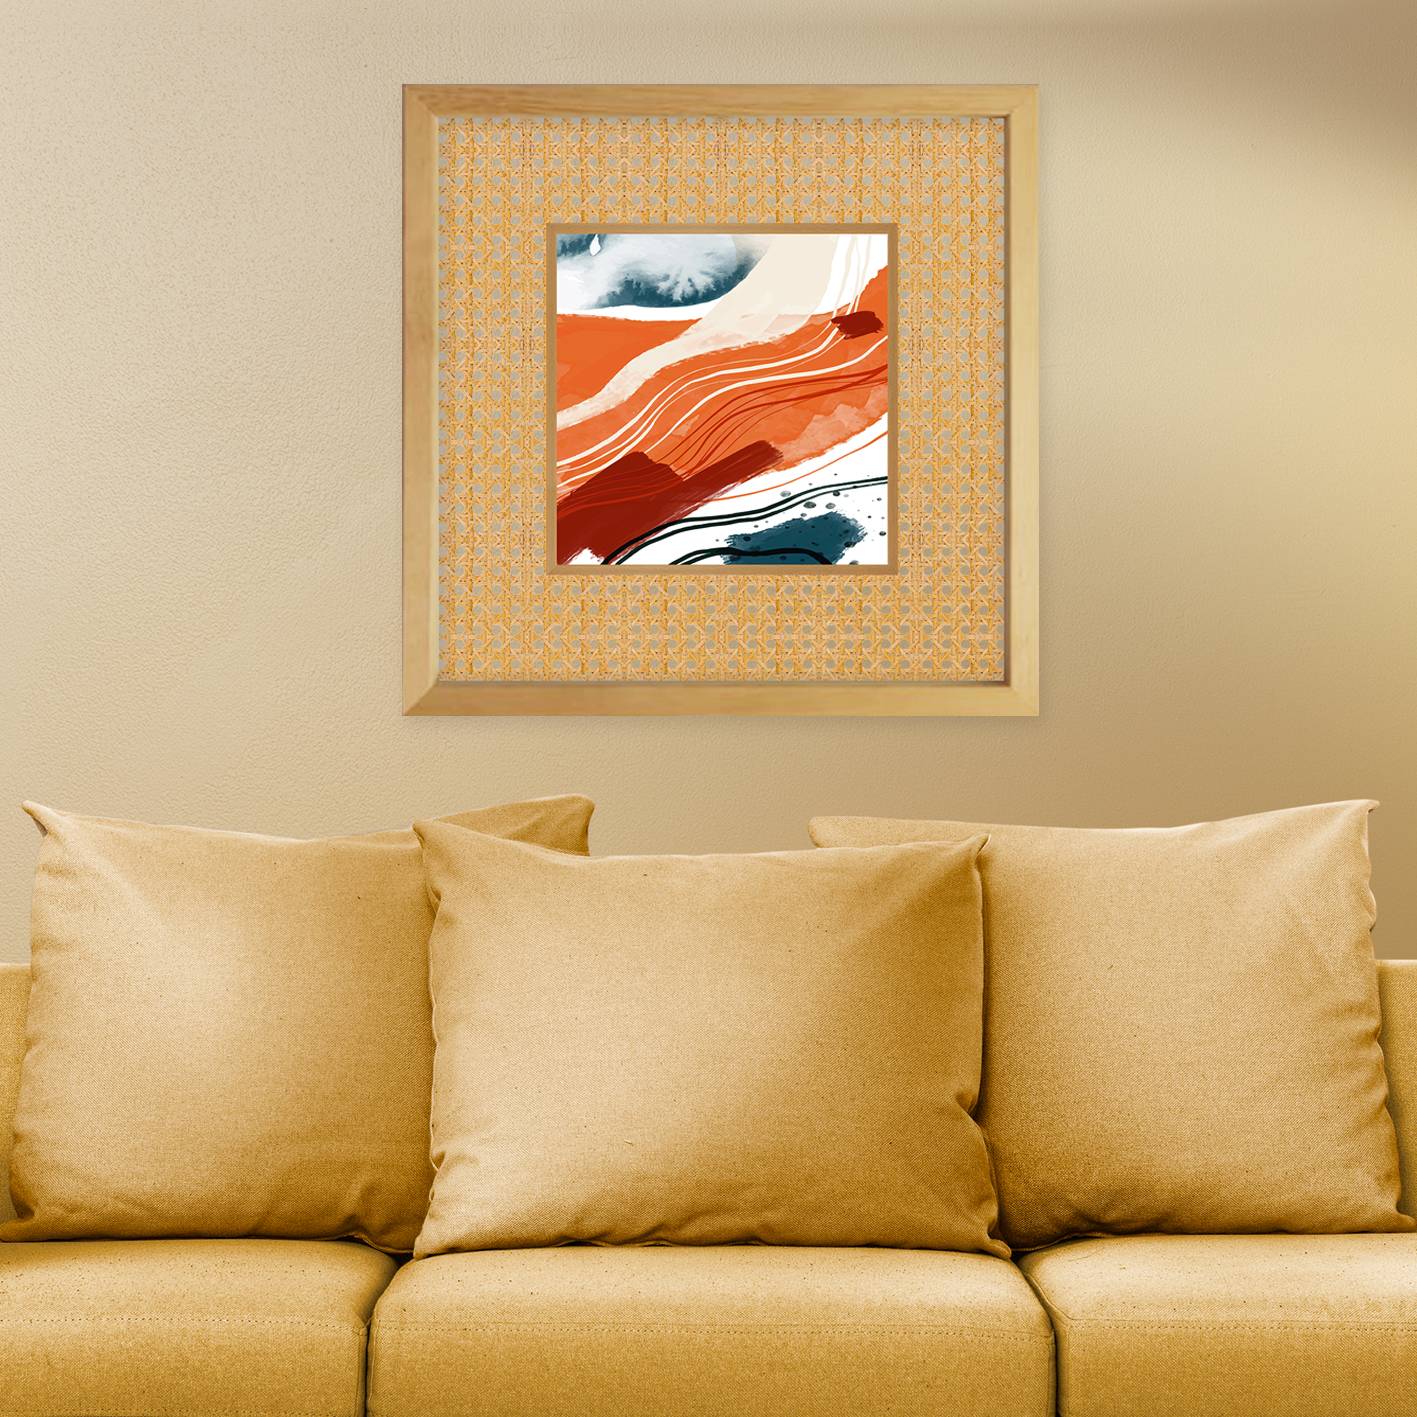 Wooden Natural Framed Glass Wicker Painting